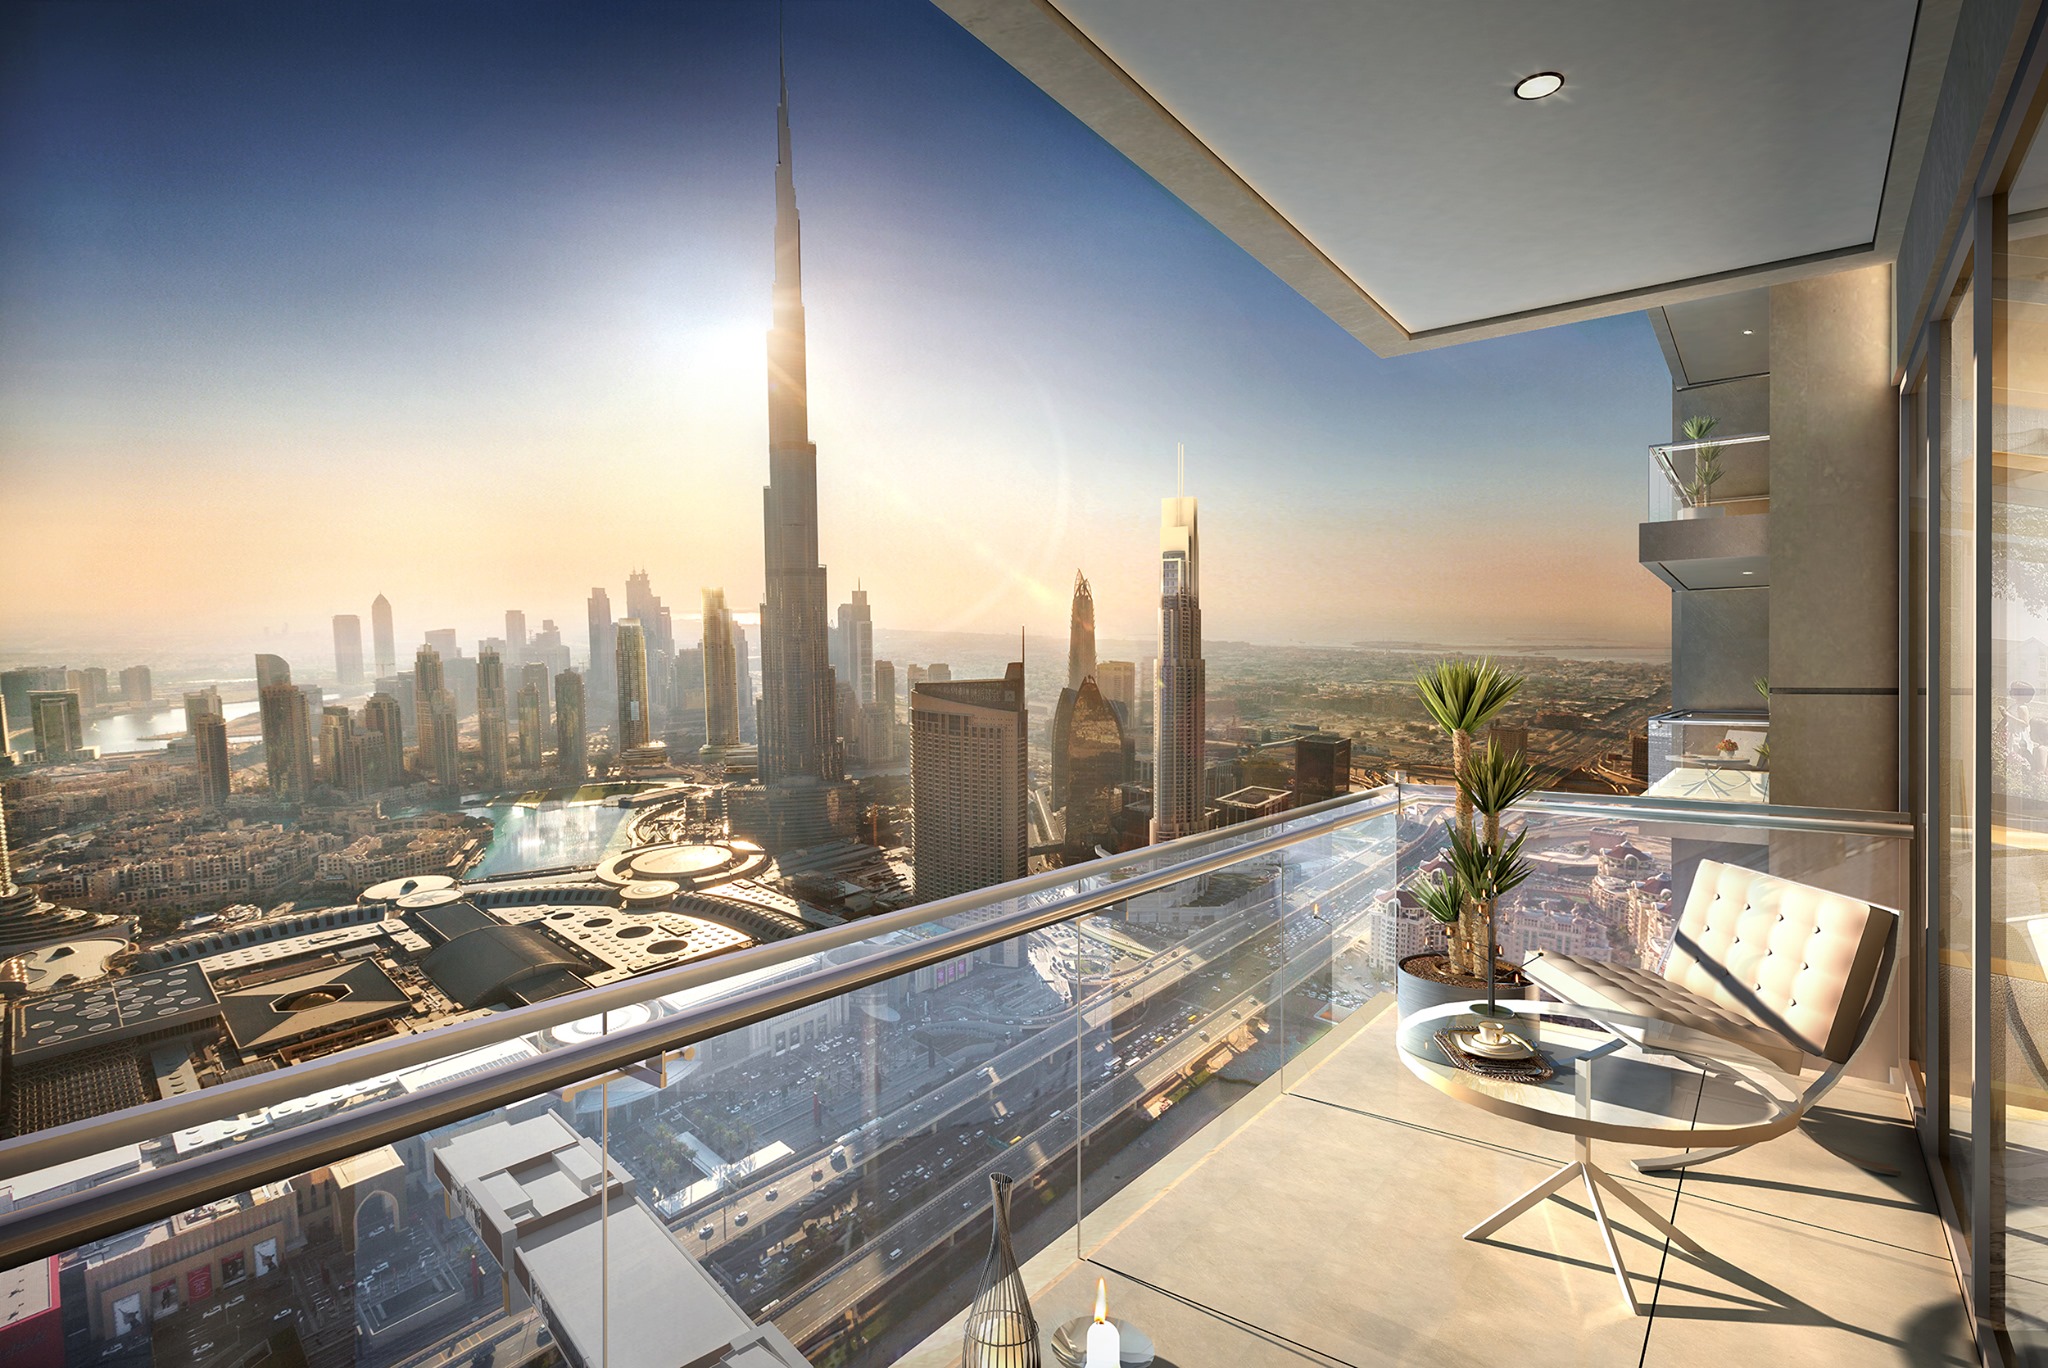 Get Amazing Services of Property Management Company in Dubai